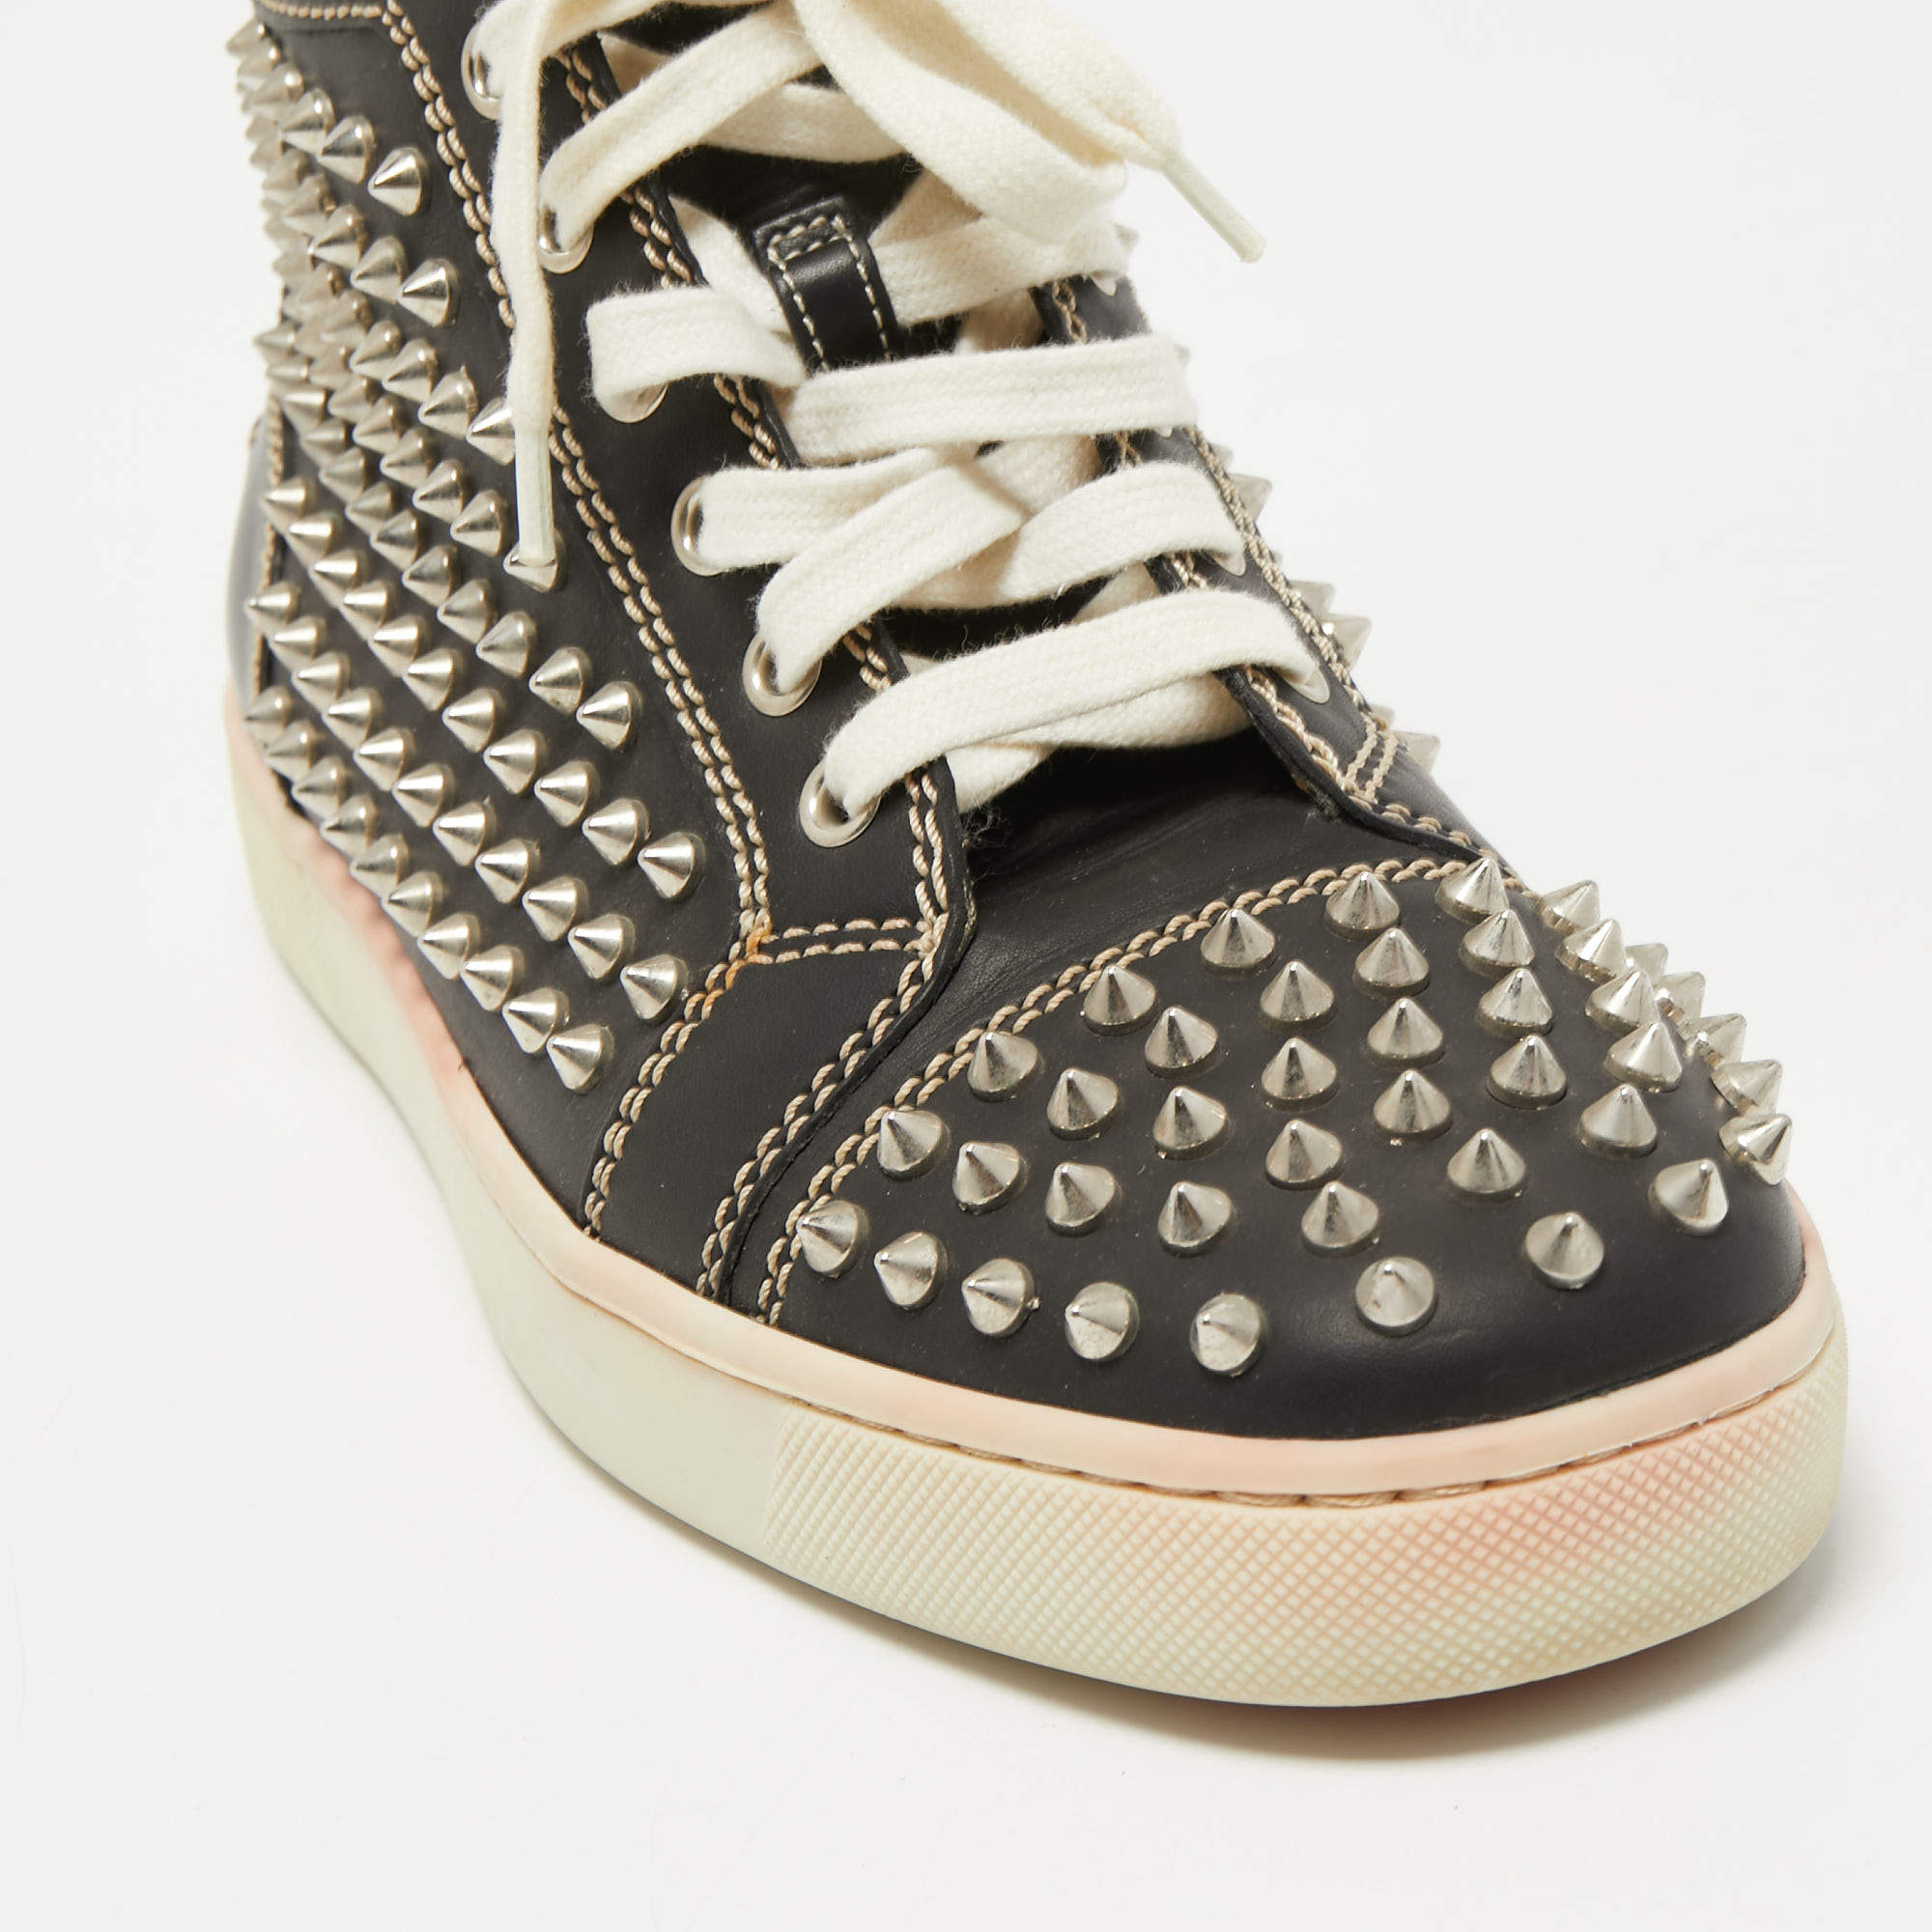 Christian Louboutin Black Leather Rush Spike Lace Up Sneakers Size 40  Christian Louboutin